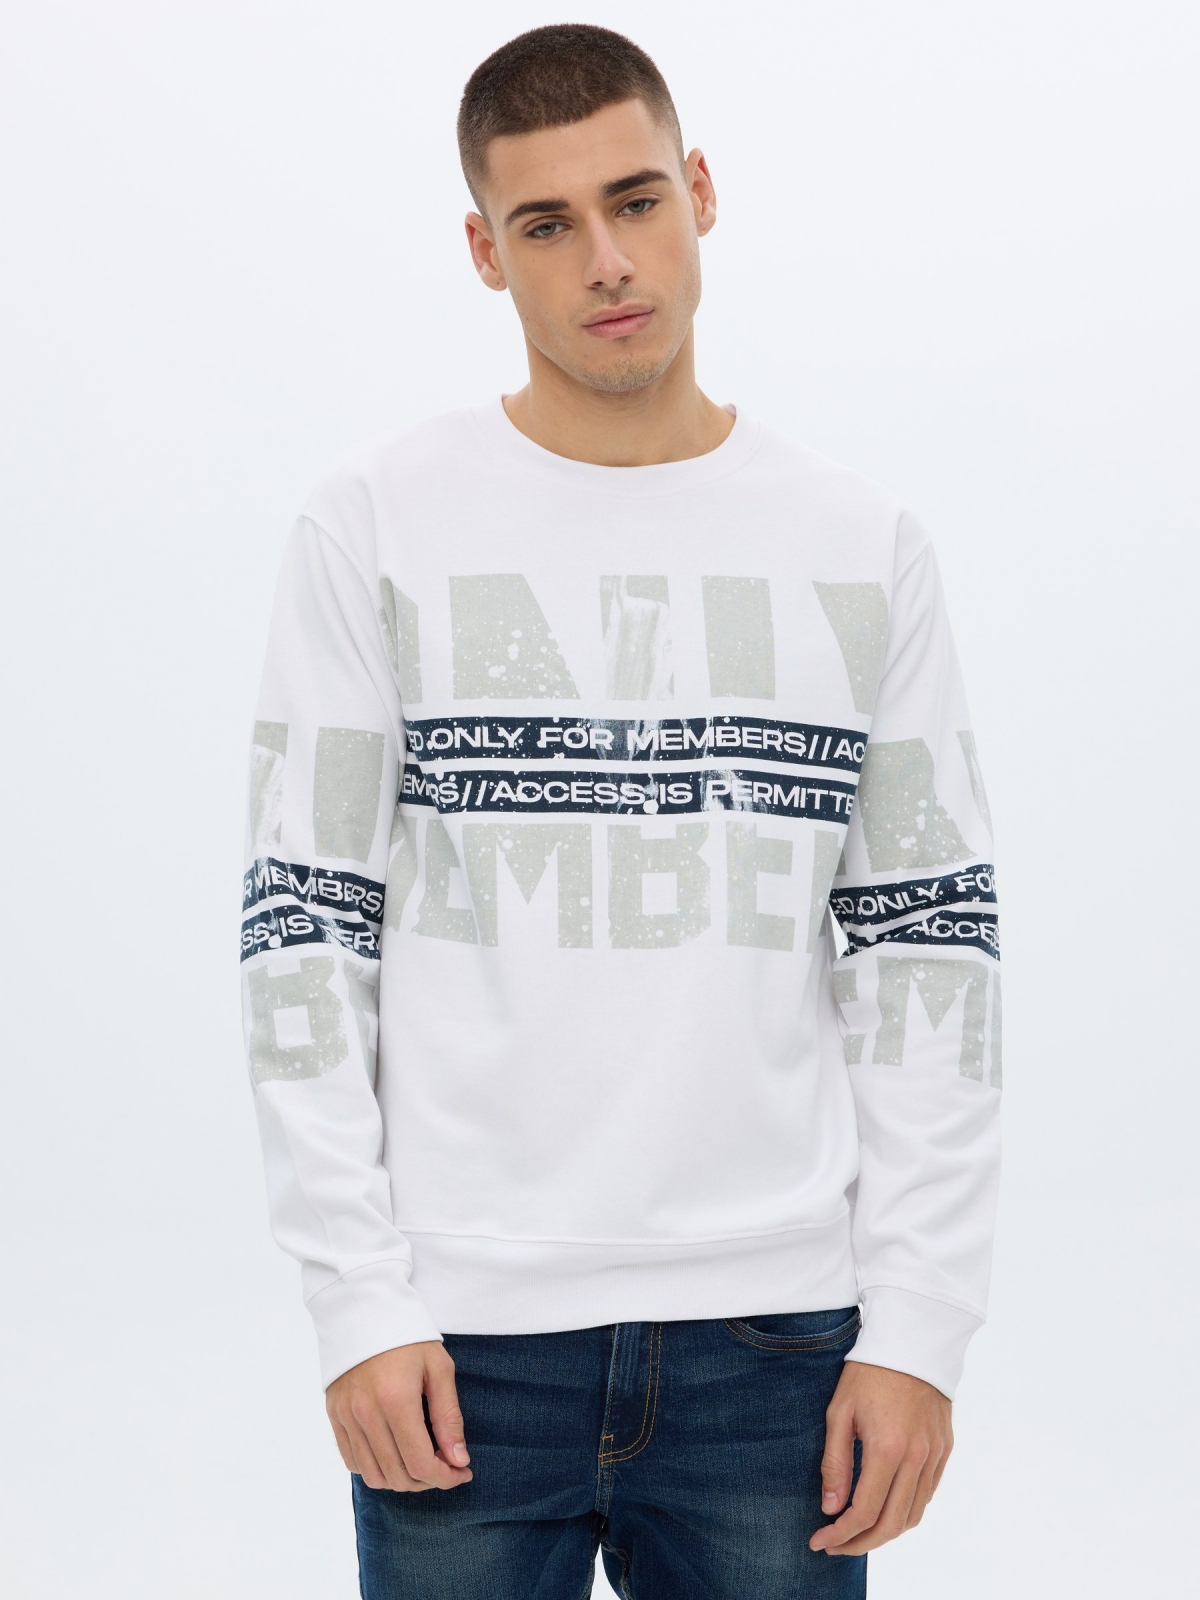 White sweatshirt printed letters white middle front view